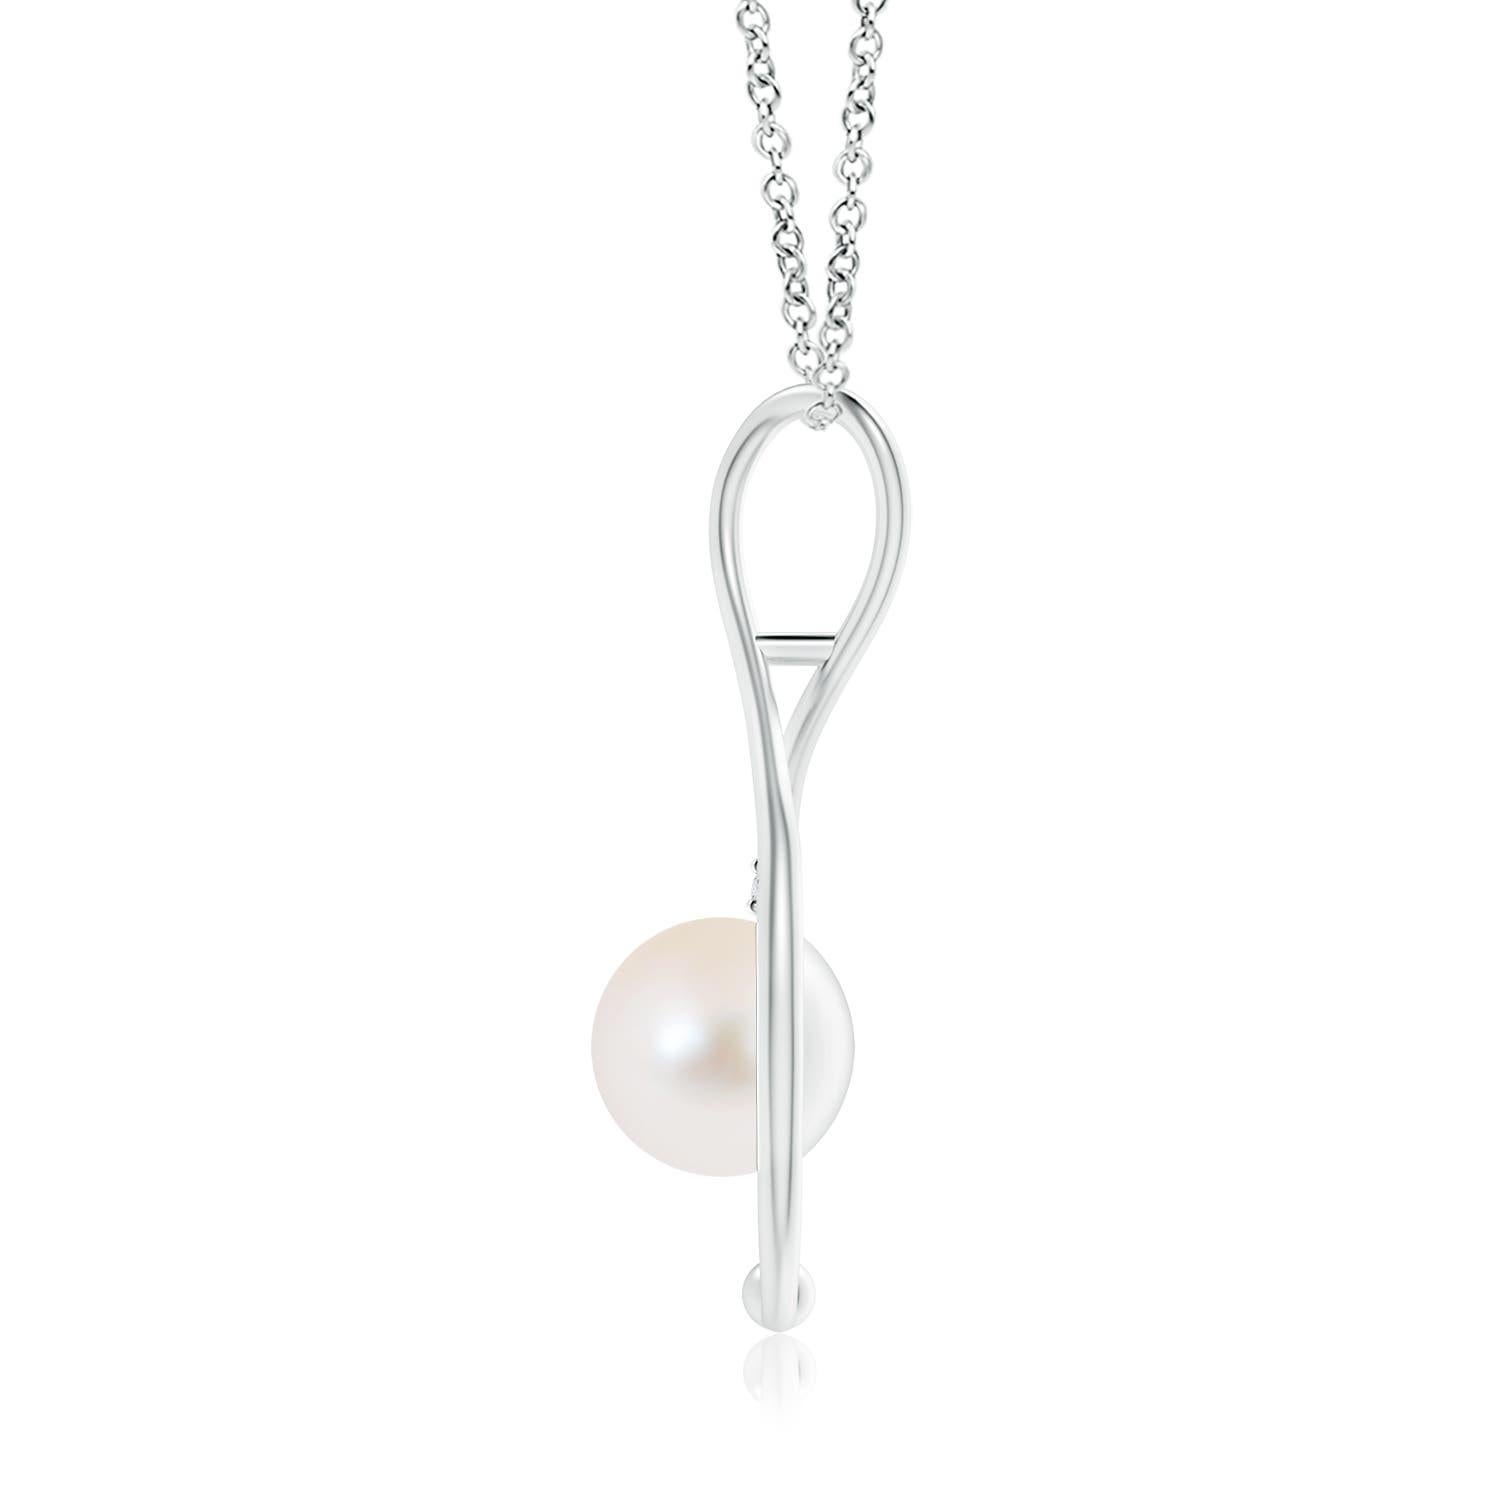 A modern classic, this pearl infinity necklace in 14K white gold is a beautiful interpretation of the popular infinity symbol. The infinity loop softly cuddles the round Freshwater cultured pearl to evoke a feeling of tenderness. The glimmering